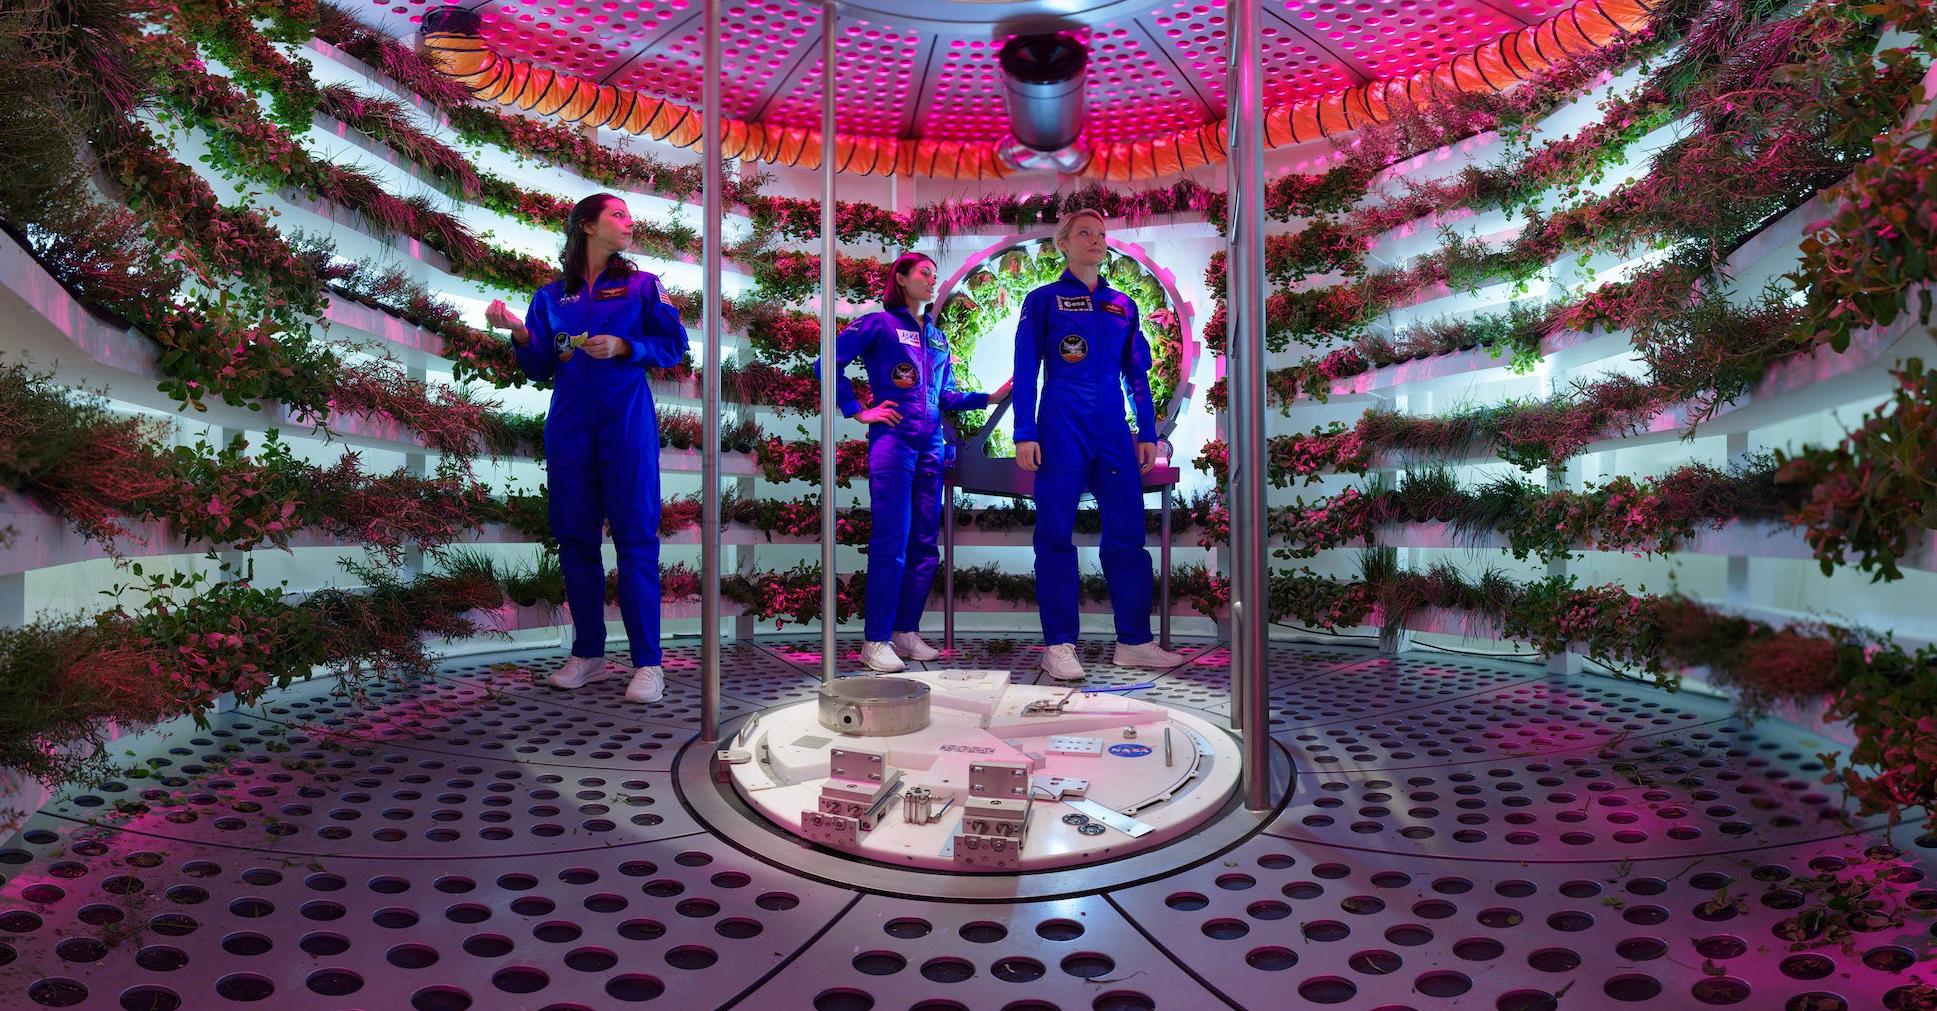 The Hong Kong Space Museum will screen a new sky show, "Mars 1001", at its Space Theatre starting May 1, enabling audiences to embark on a virtual journey that follows astronauts on a fictional 1,001-day first manned mission to explore the red planet. Picture shows the hydroponic growing system on the Mars transfer vehicle, which serves as an important food source for the astronauts in the show. (Source of photo: © Mirage3D)